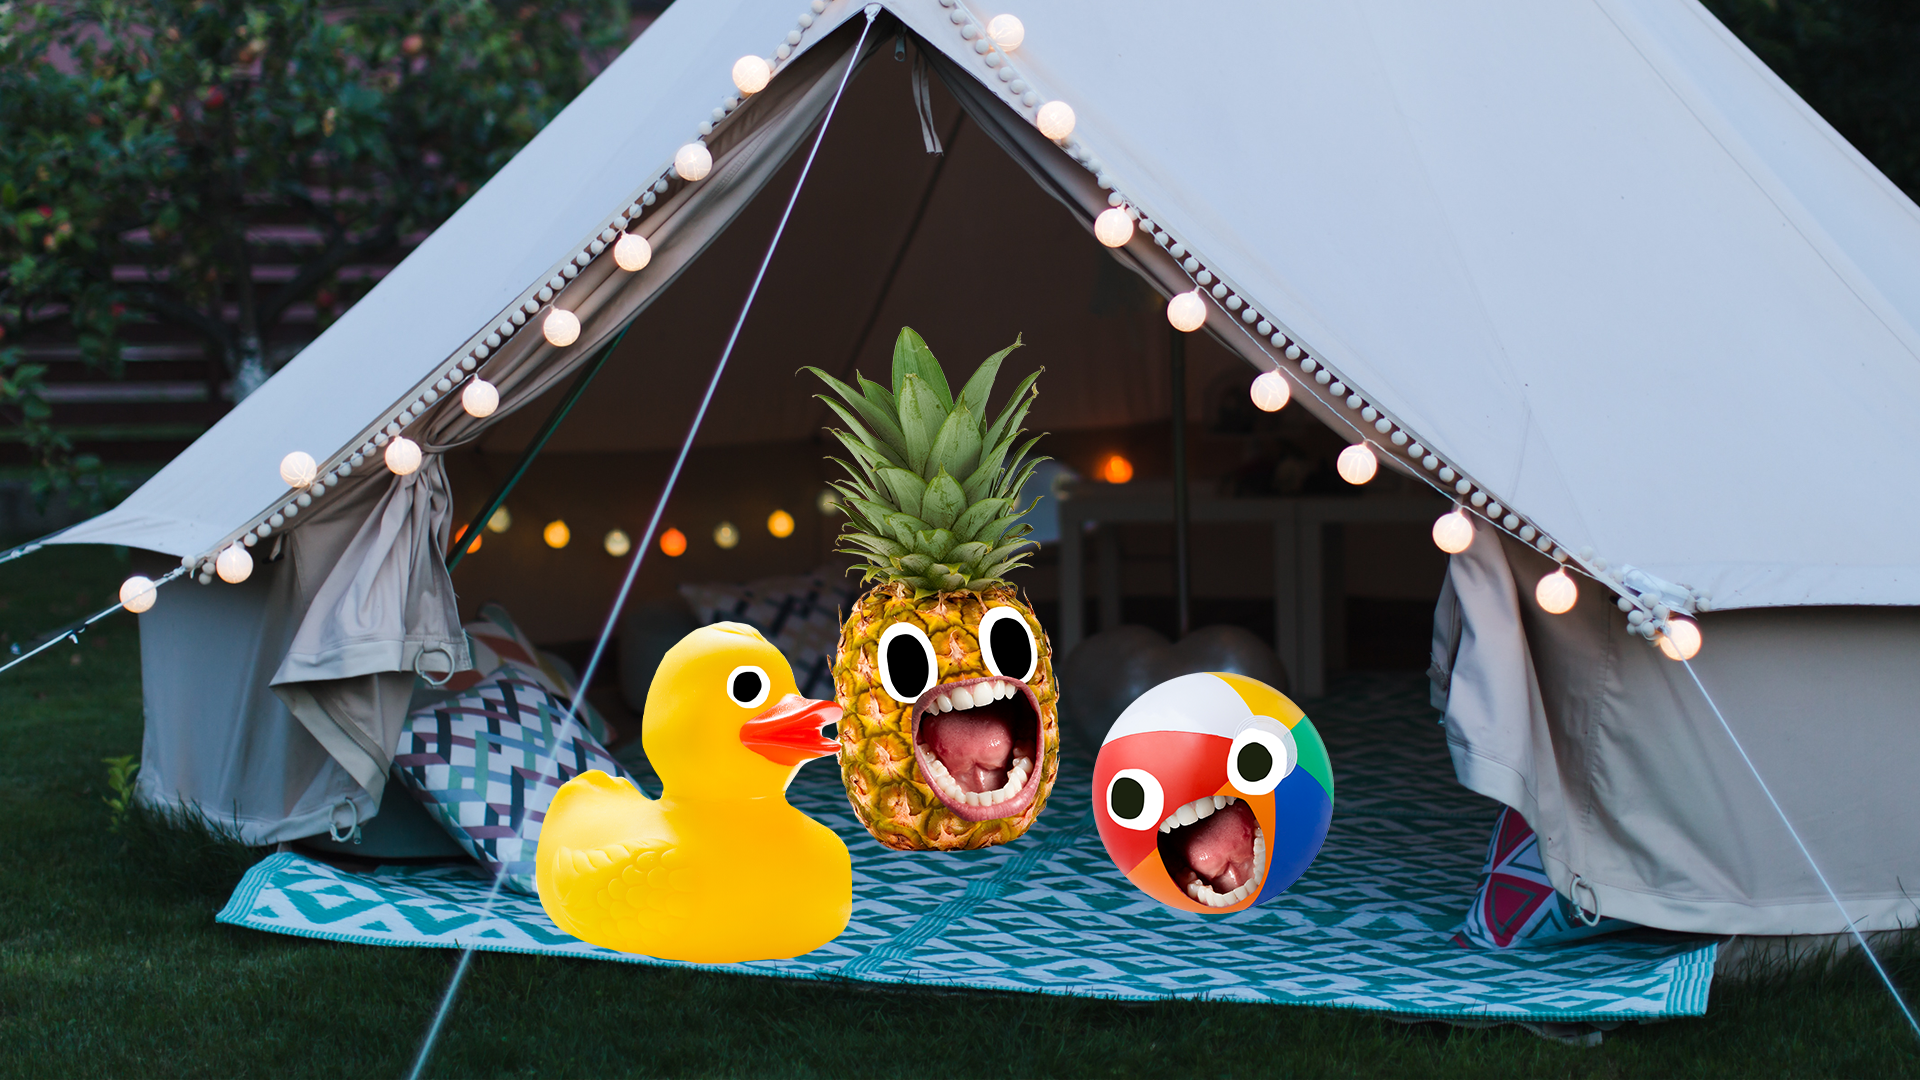 Duck, pineapple and ball with faces in tent